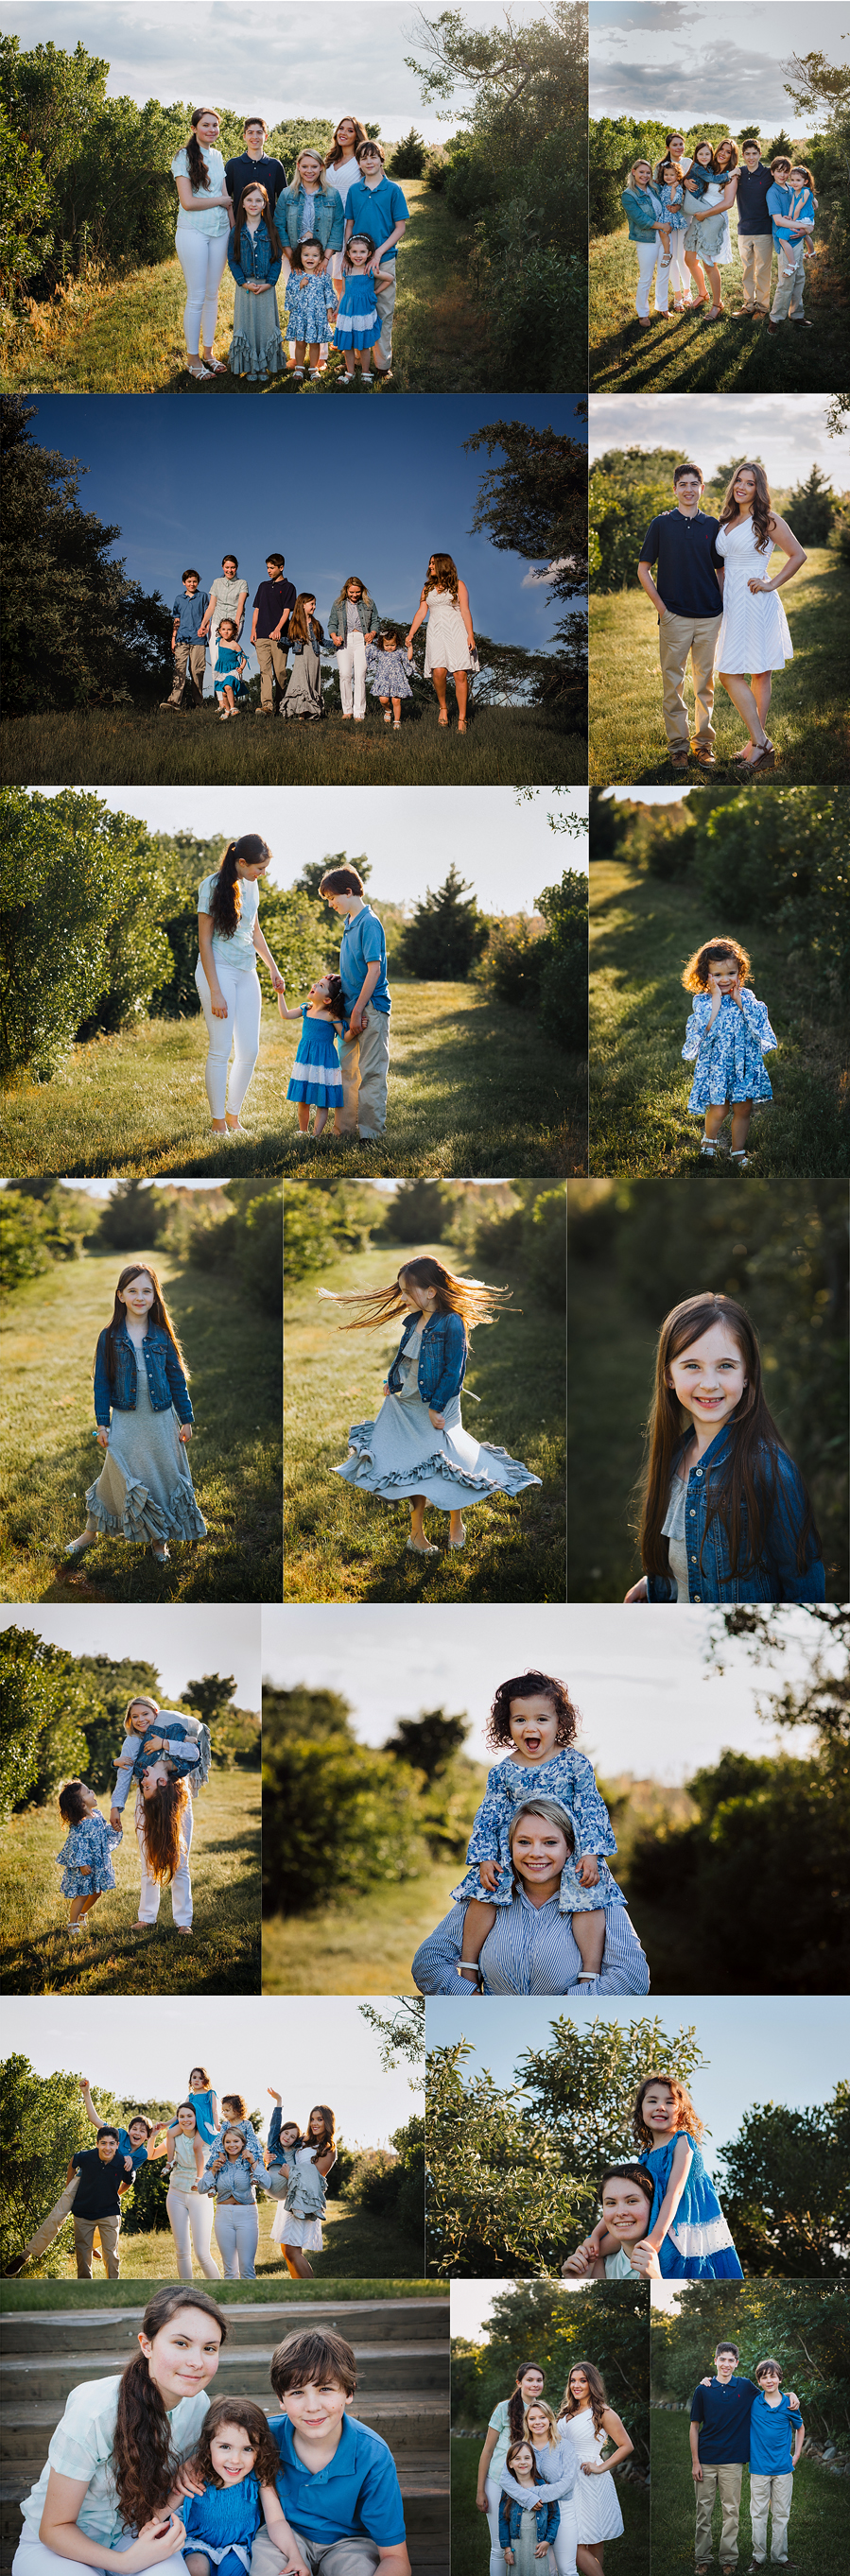 Photographs of Cousins from Long Island outdoors in a beautiful preserve.